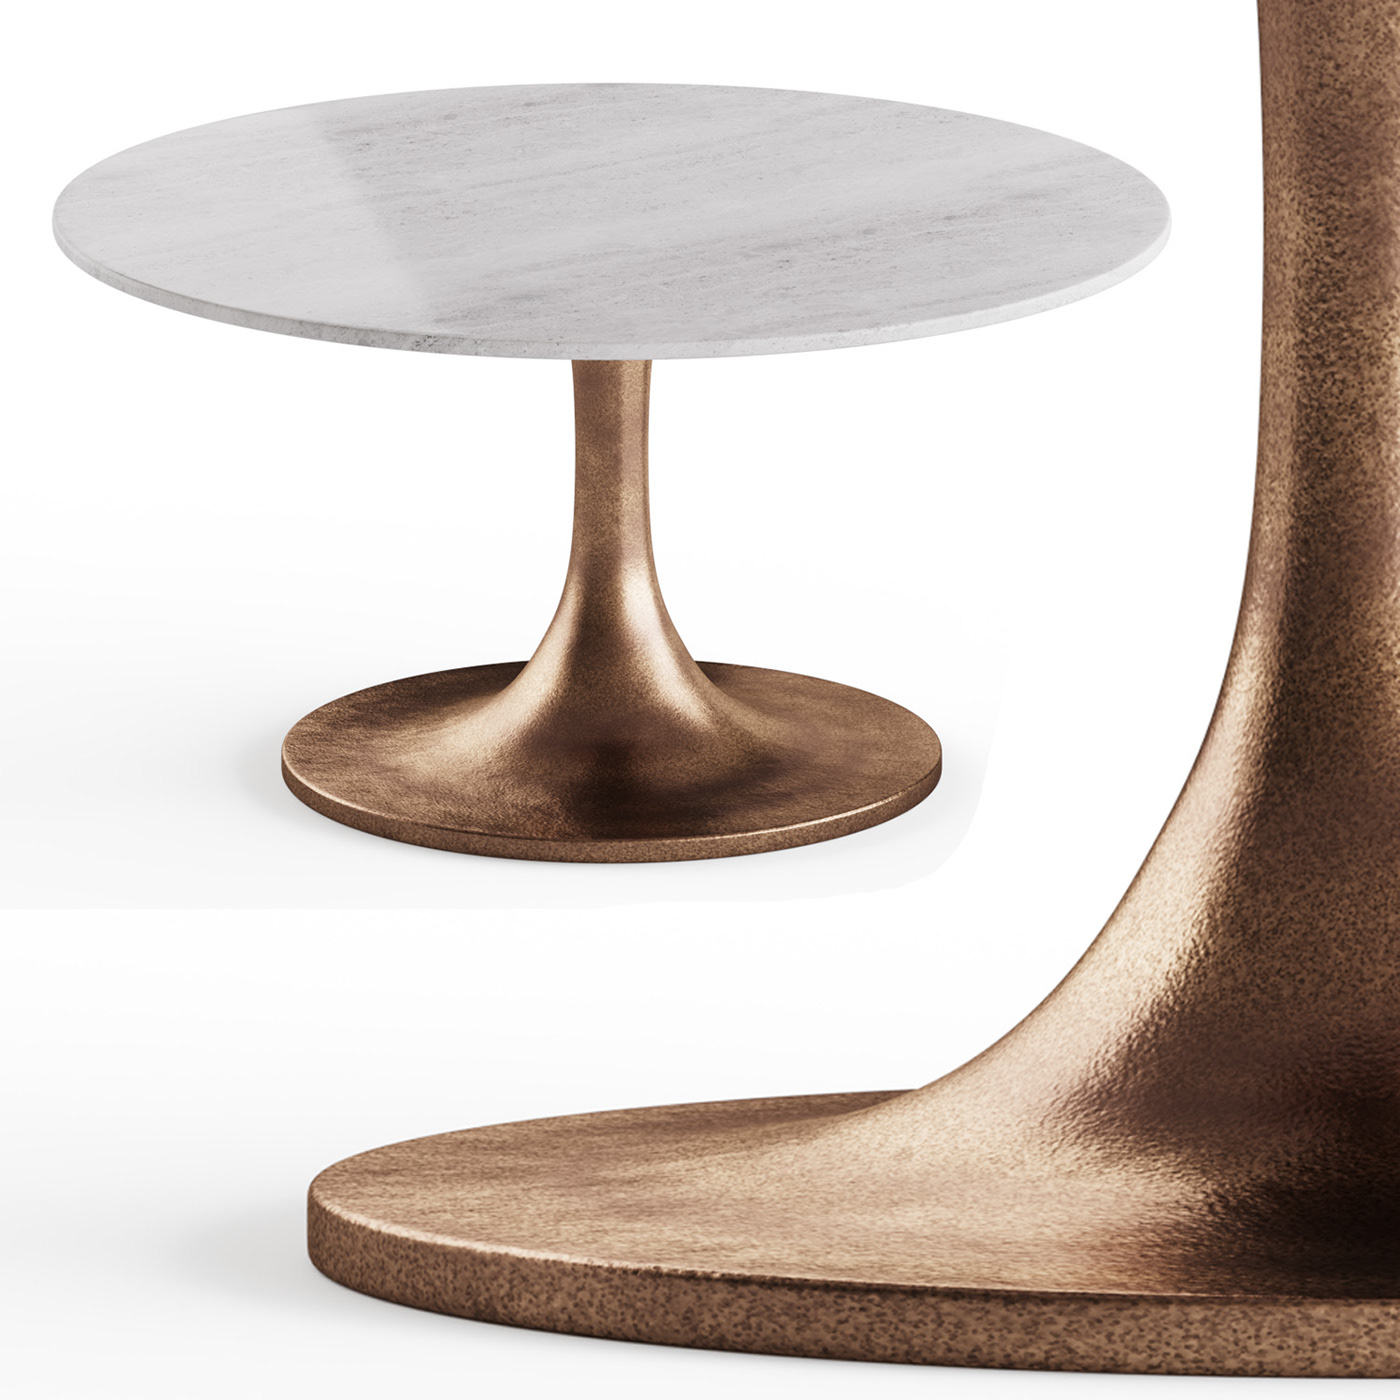 indoor 3ds max visualization Render corona coffetable Marble